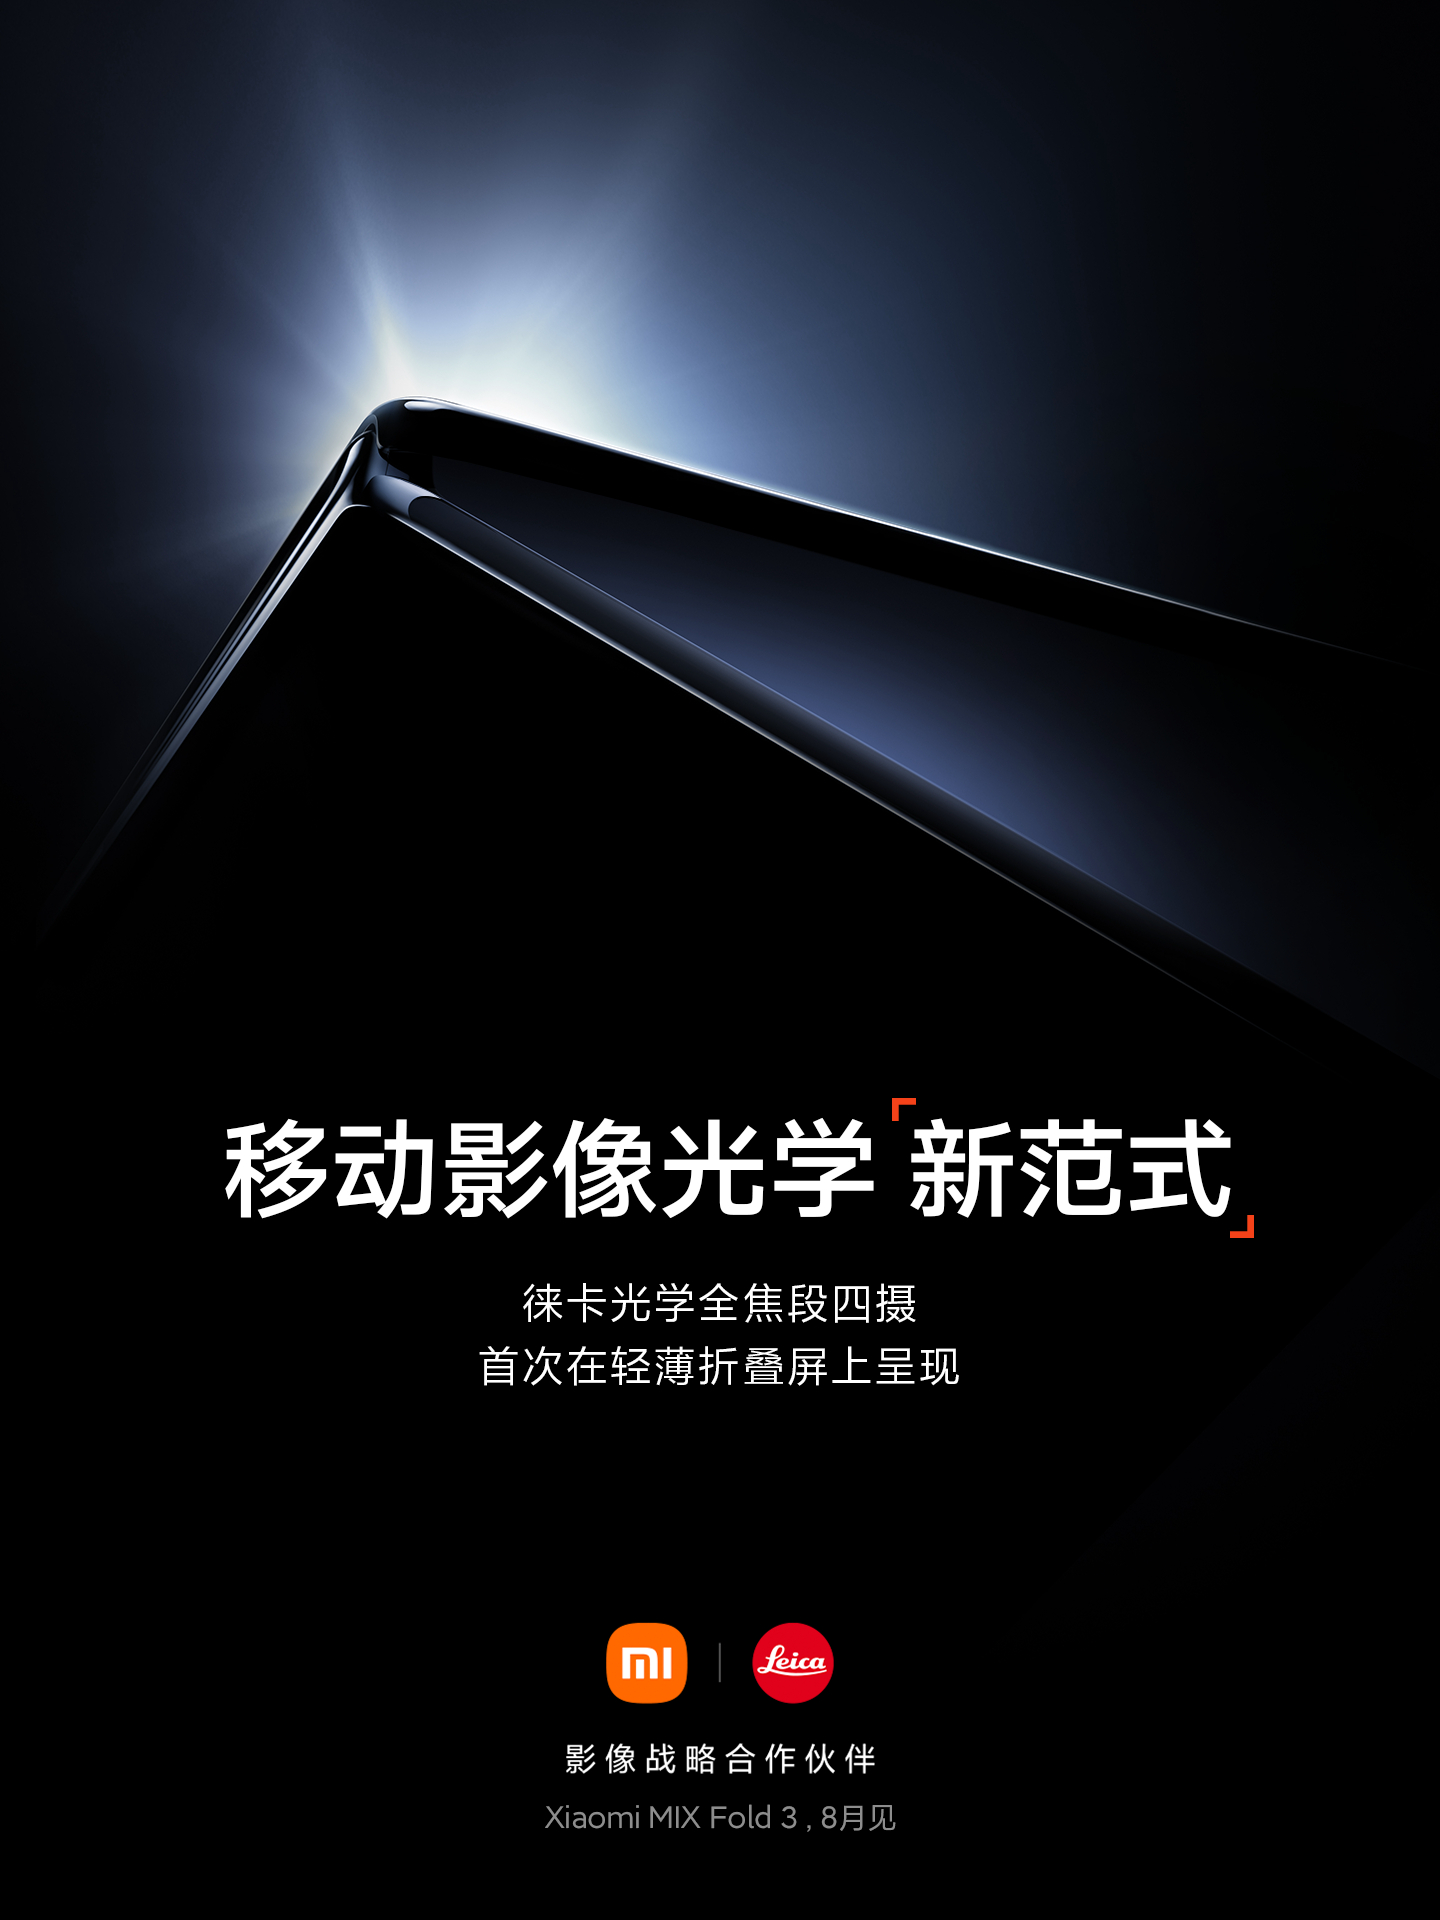 Xiaomi Expected to Launch Mix Fold 3 Soon, Leica Collaboration in Tow